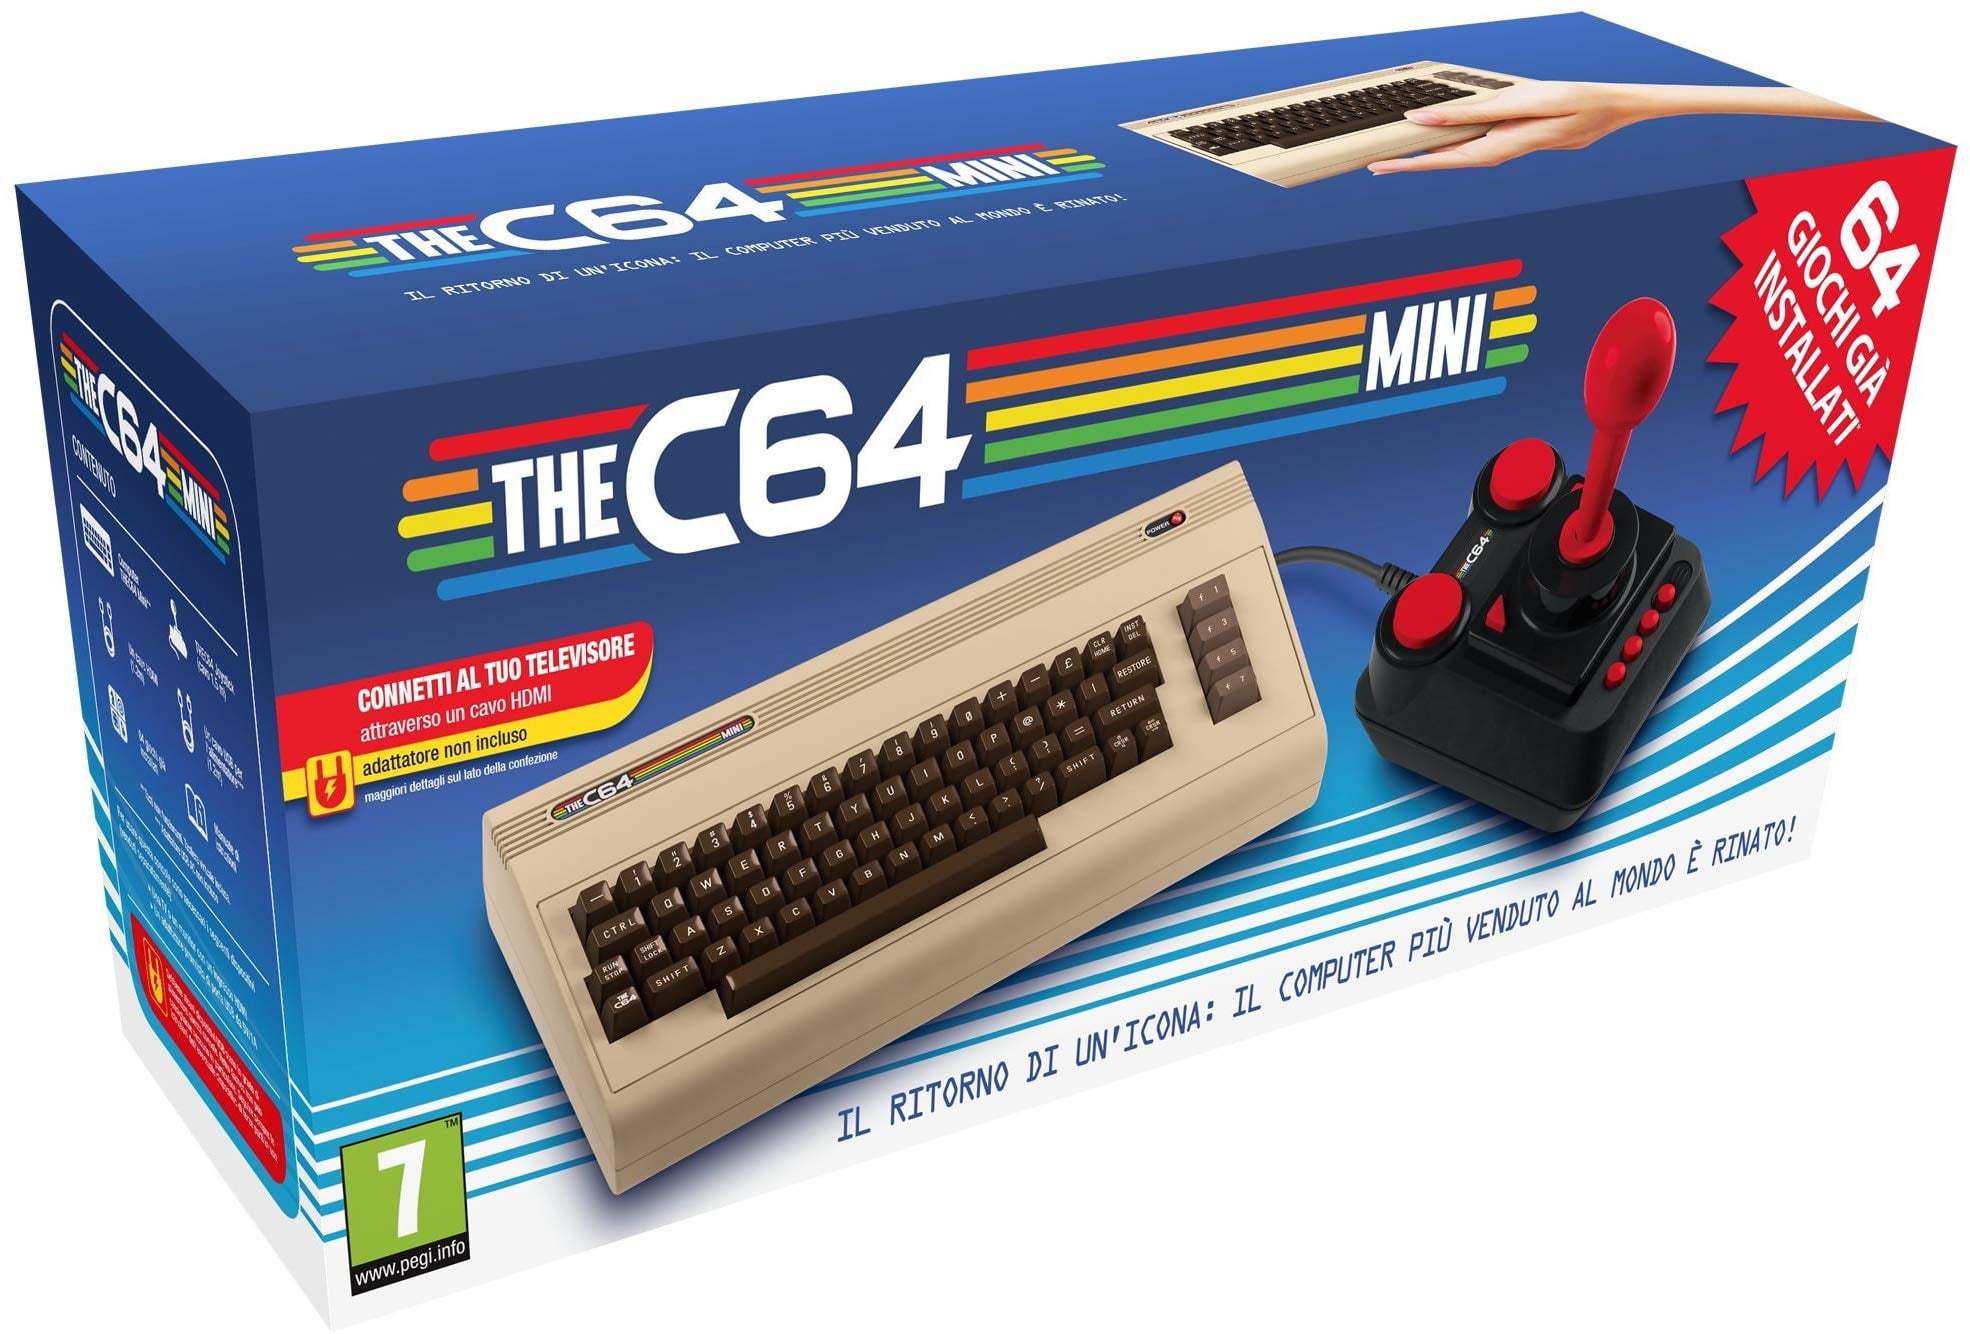 Retro Games Ltd - TheC64 the400 thea500 thevic20 and more